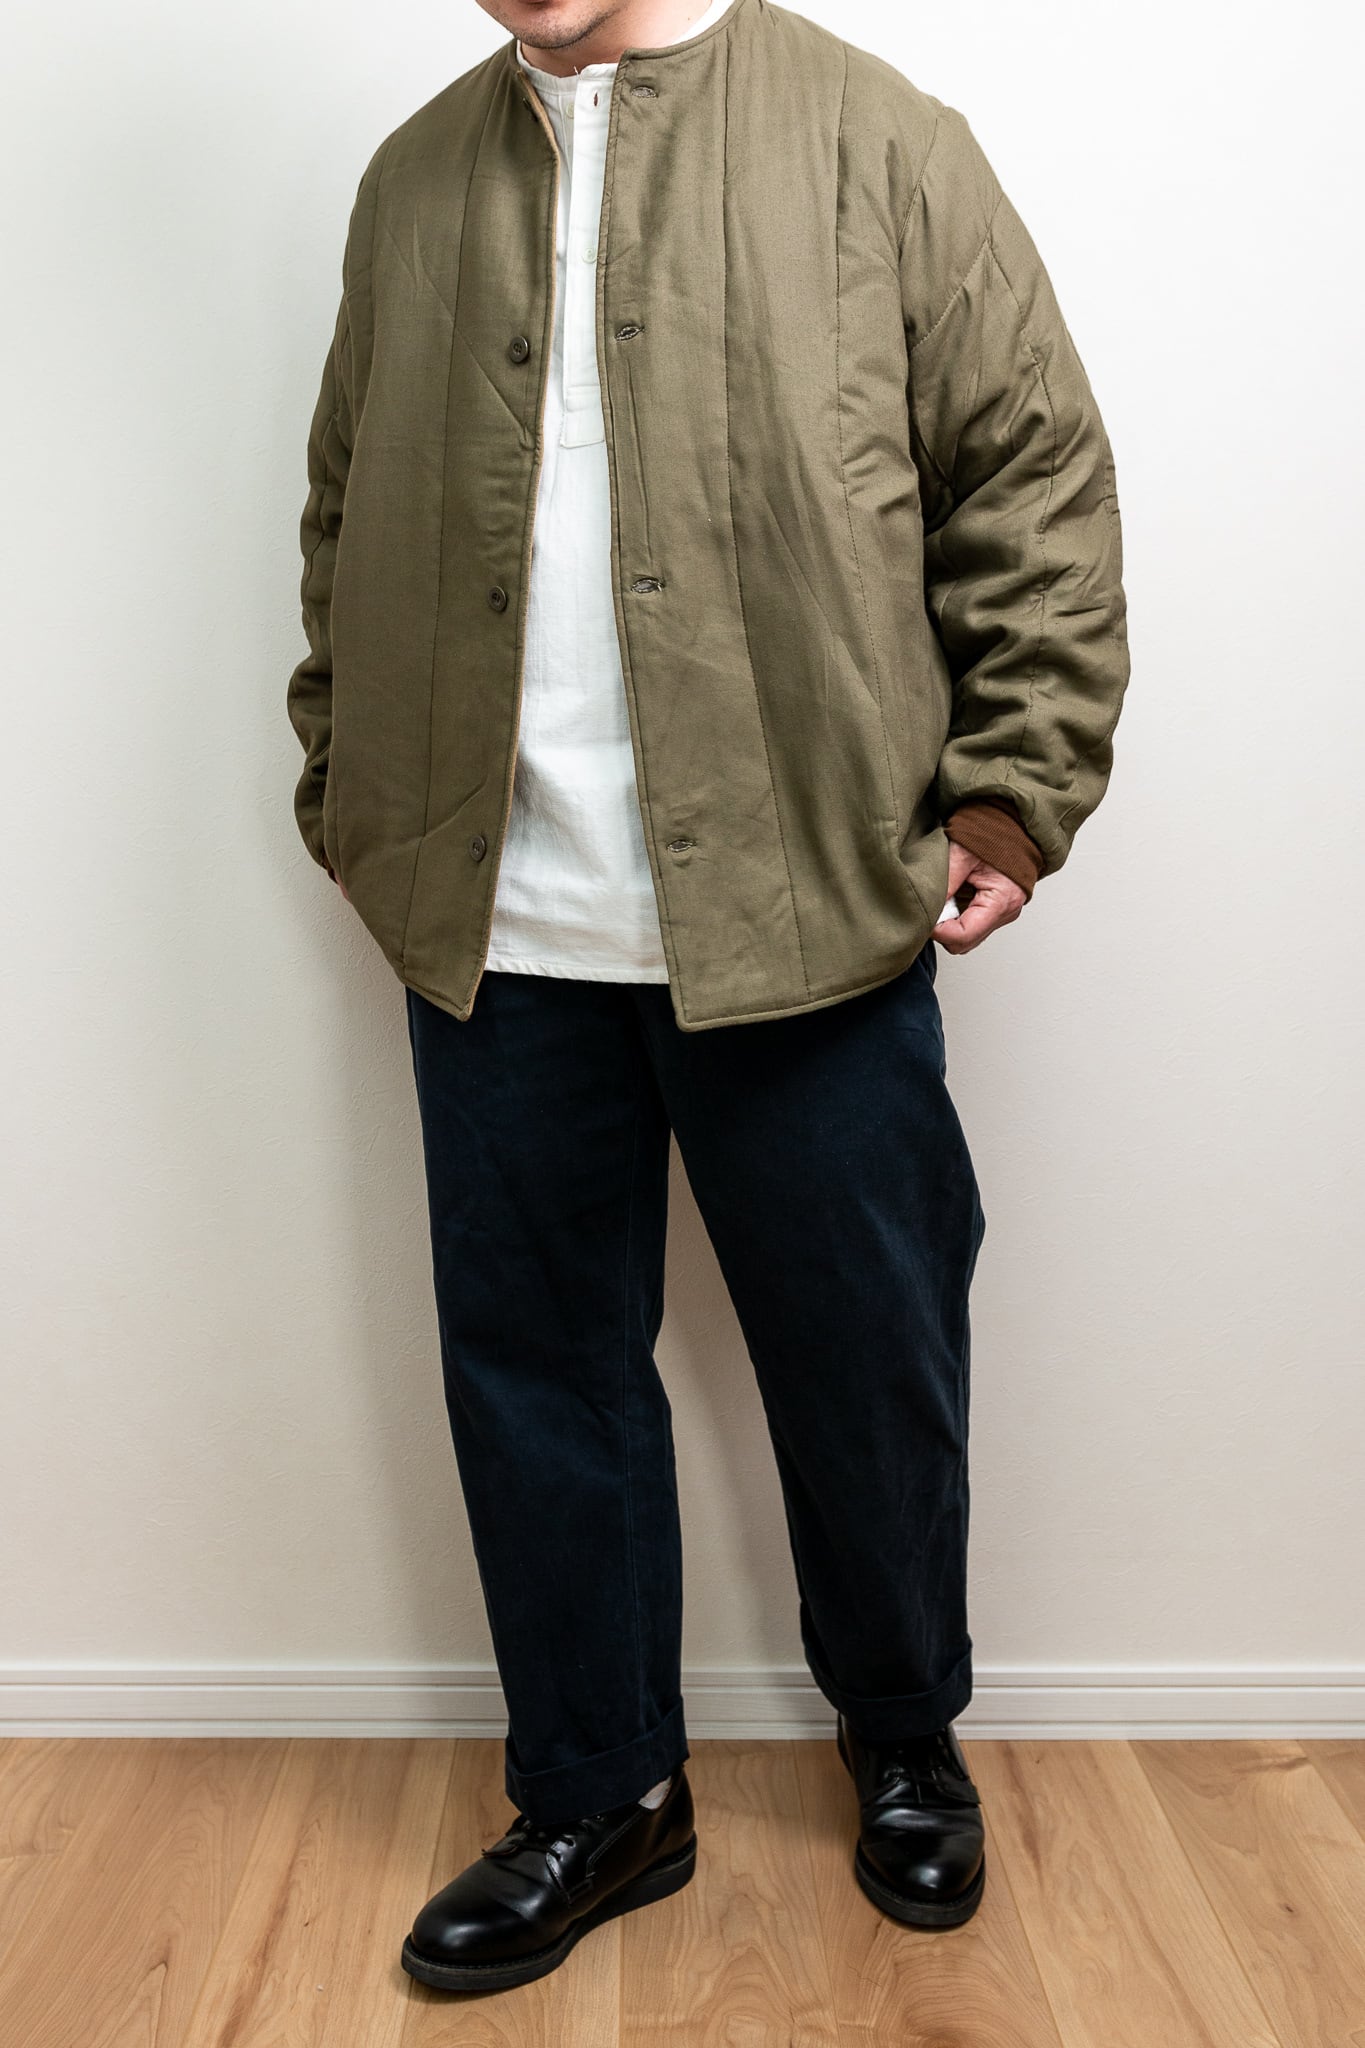 DEADSTOCK】1960's Czech Army Liner Jacket 実物 デッドストック ...